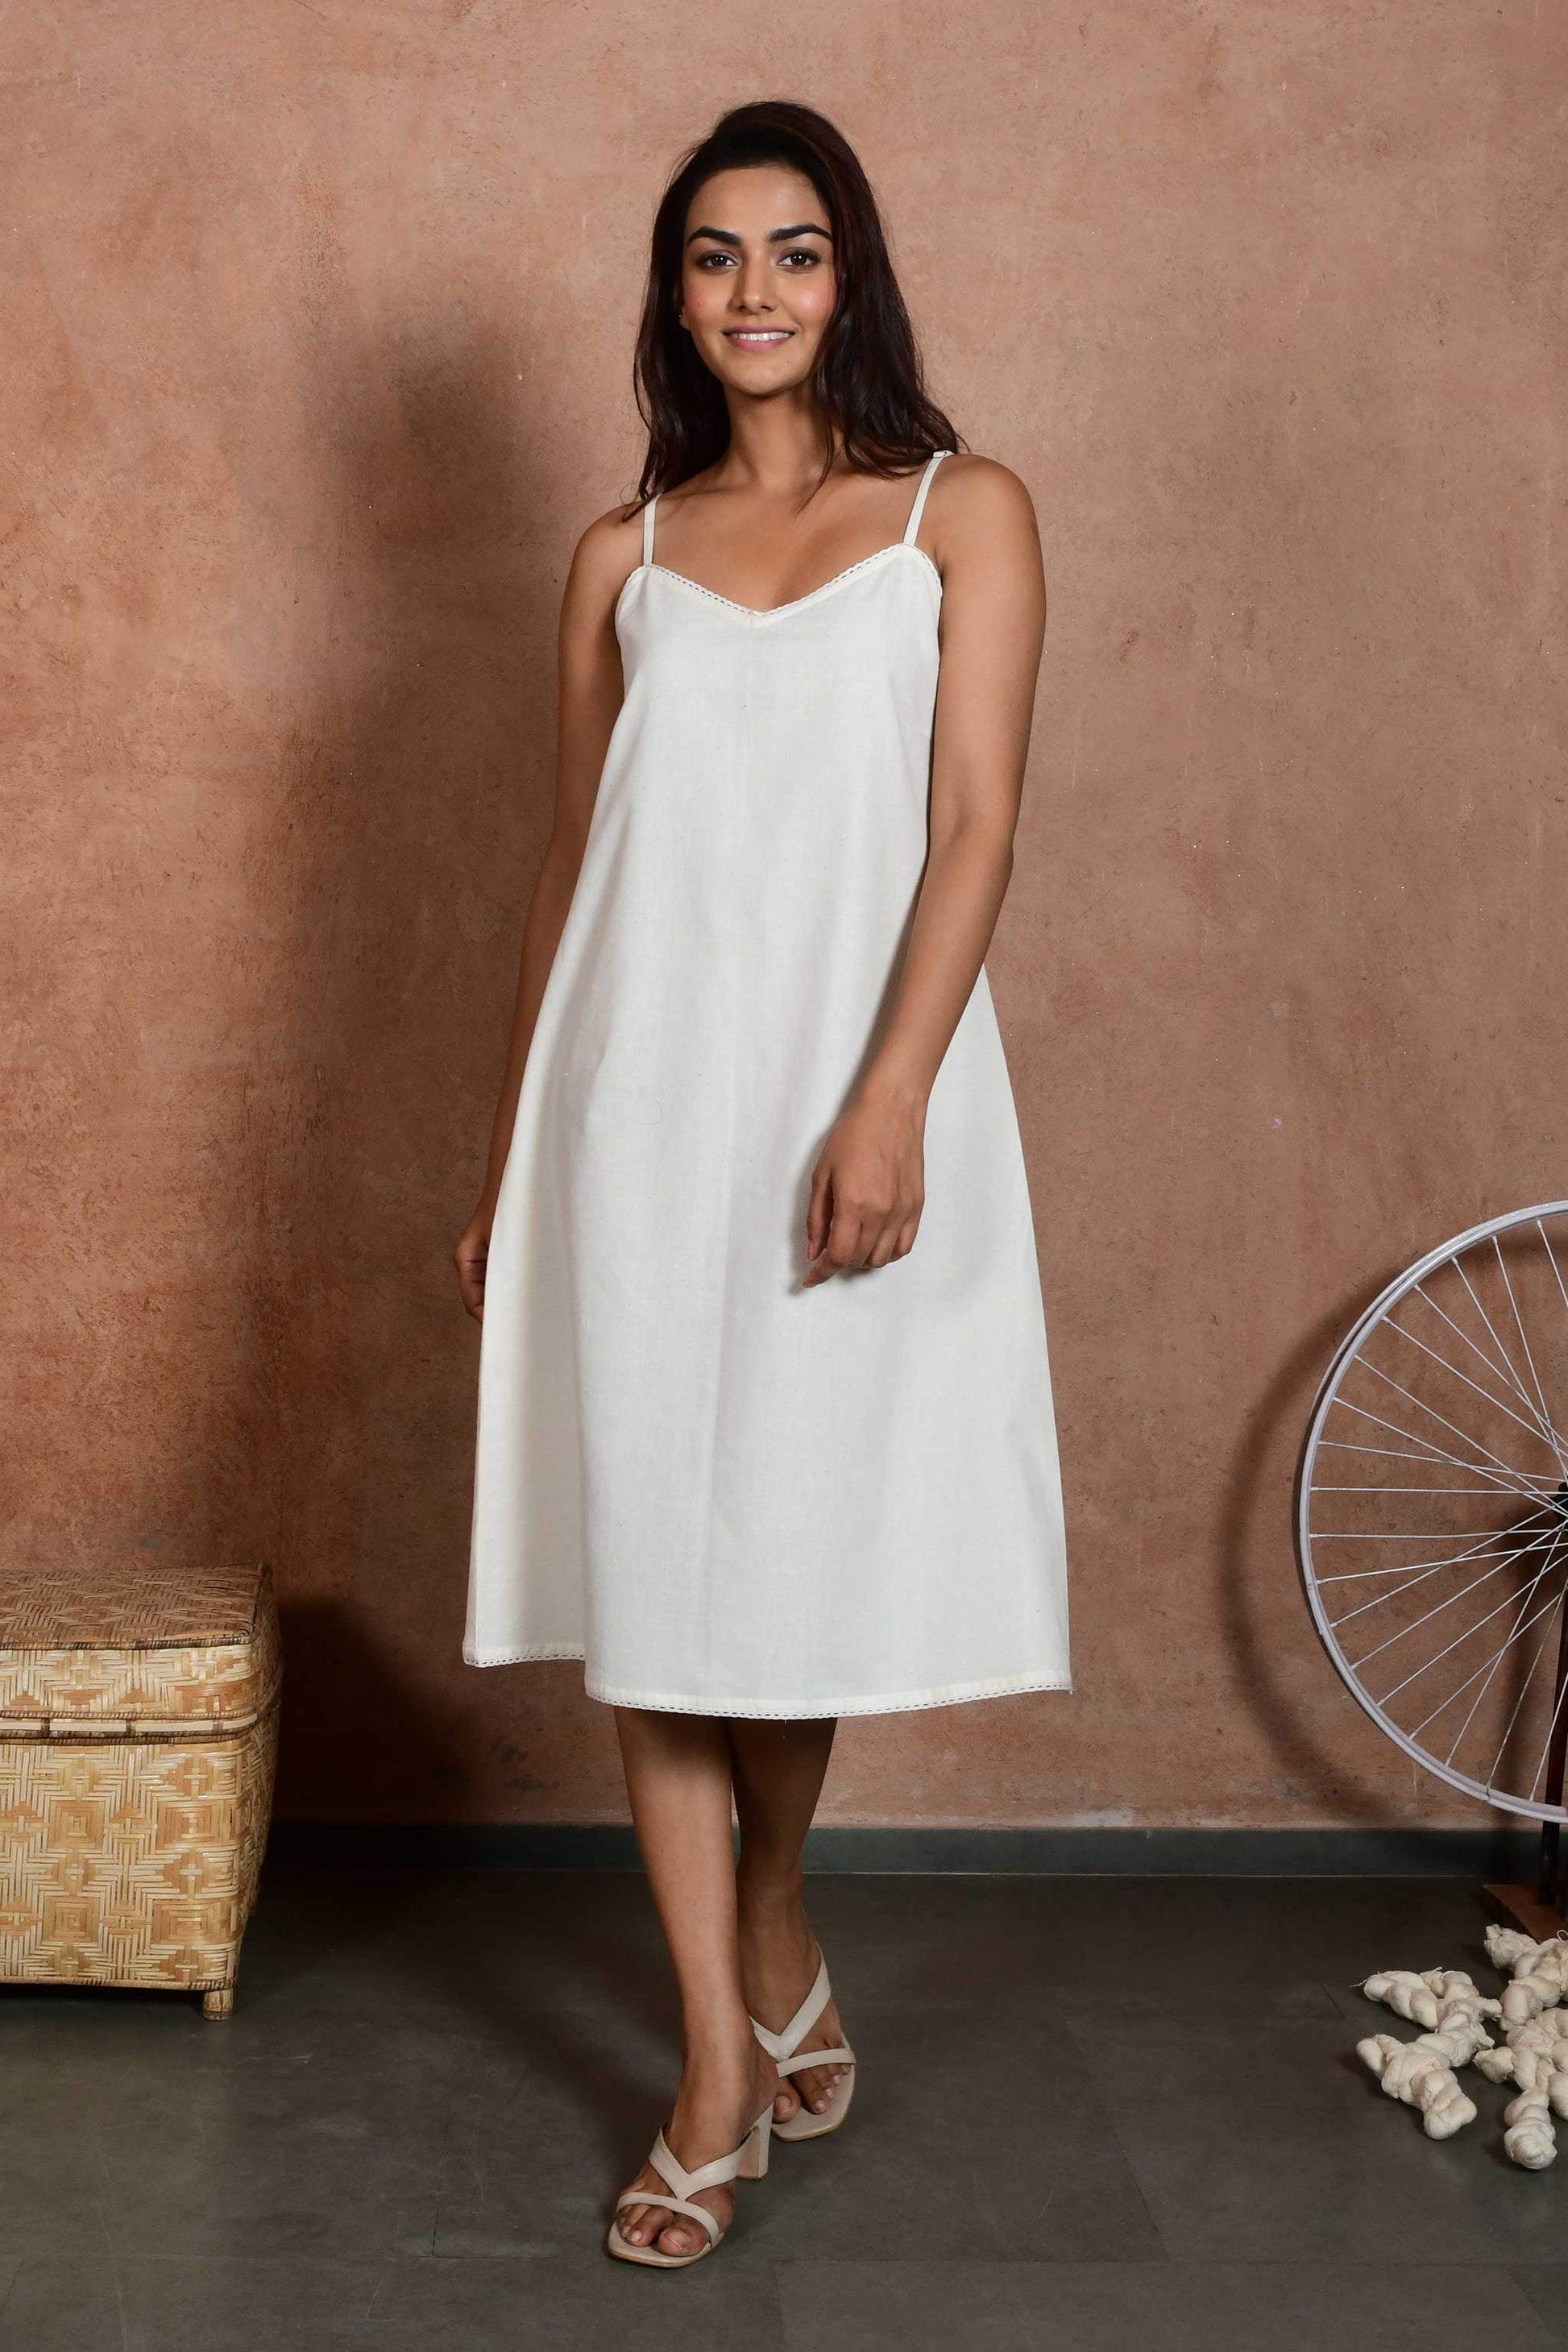 Front pose of an indian model wearing an off white spaghetti slip dress made with handspun handloom cotton.